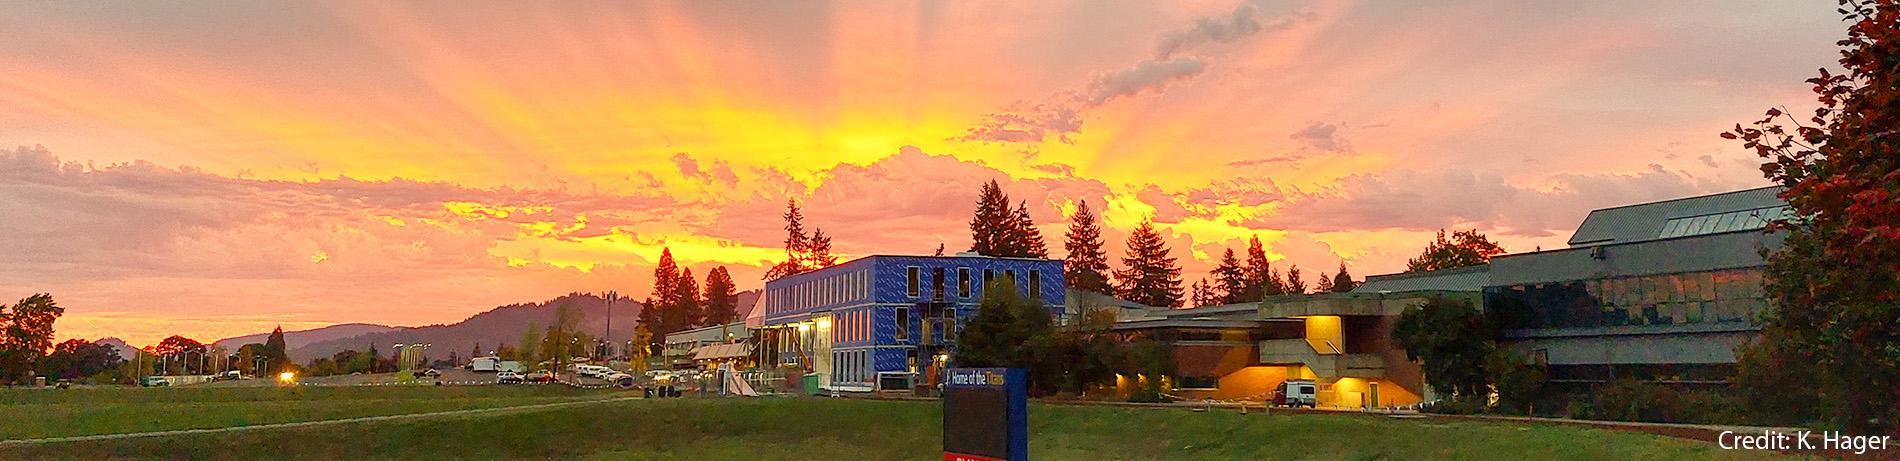 sunrise over Health Professions building construction - credit K. Hager